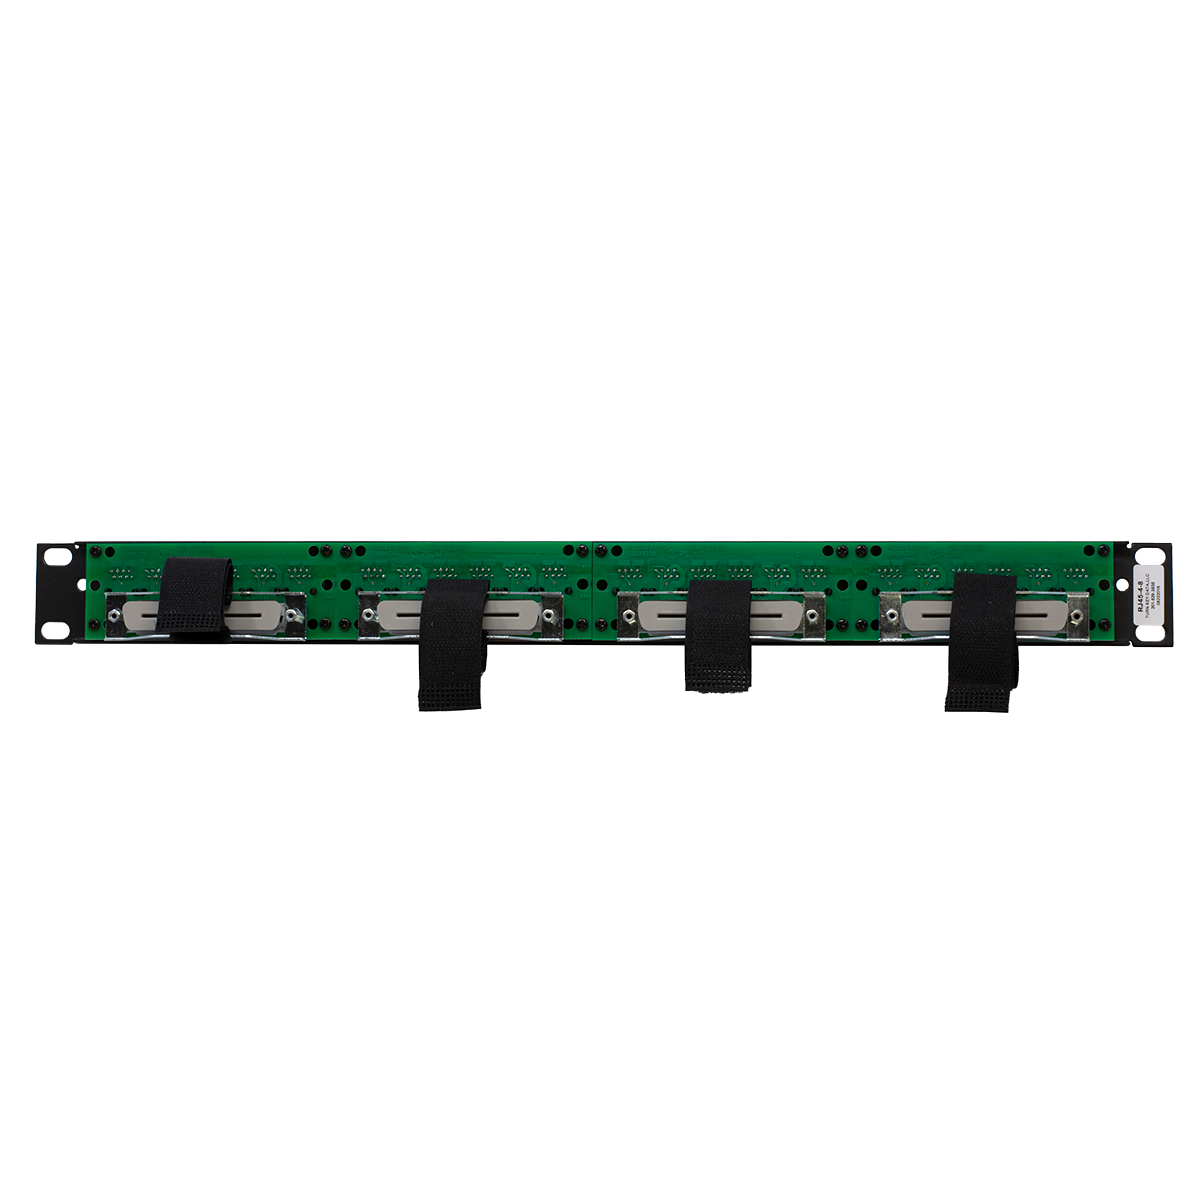 24 Port CAT5E Patch Panel with 4 Female Amp Connectors (Back View)